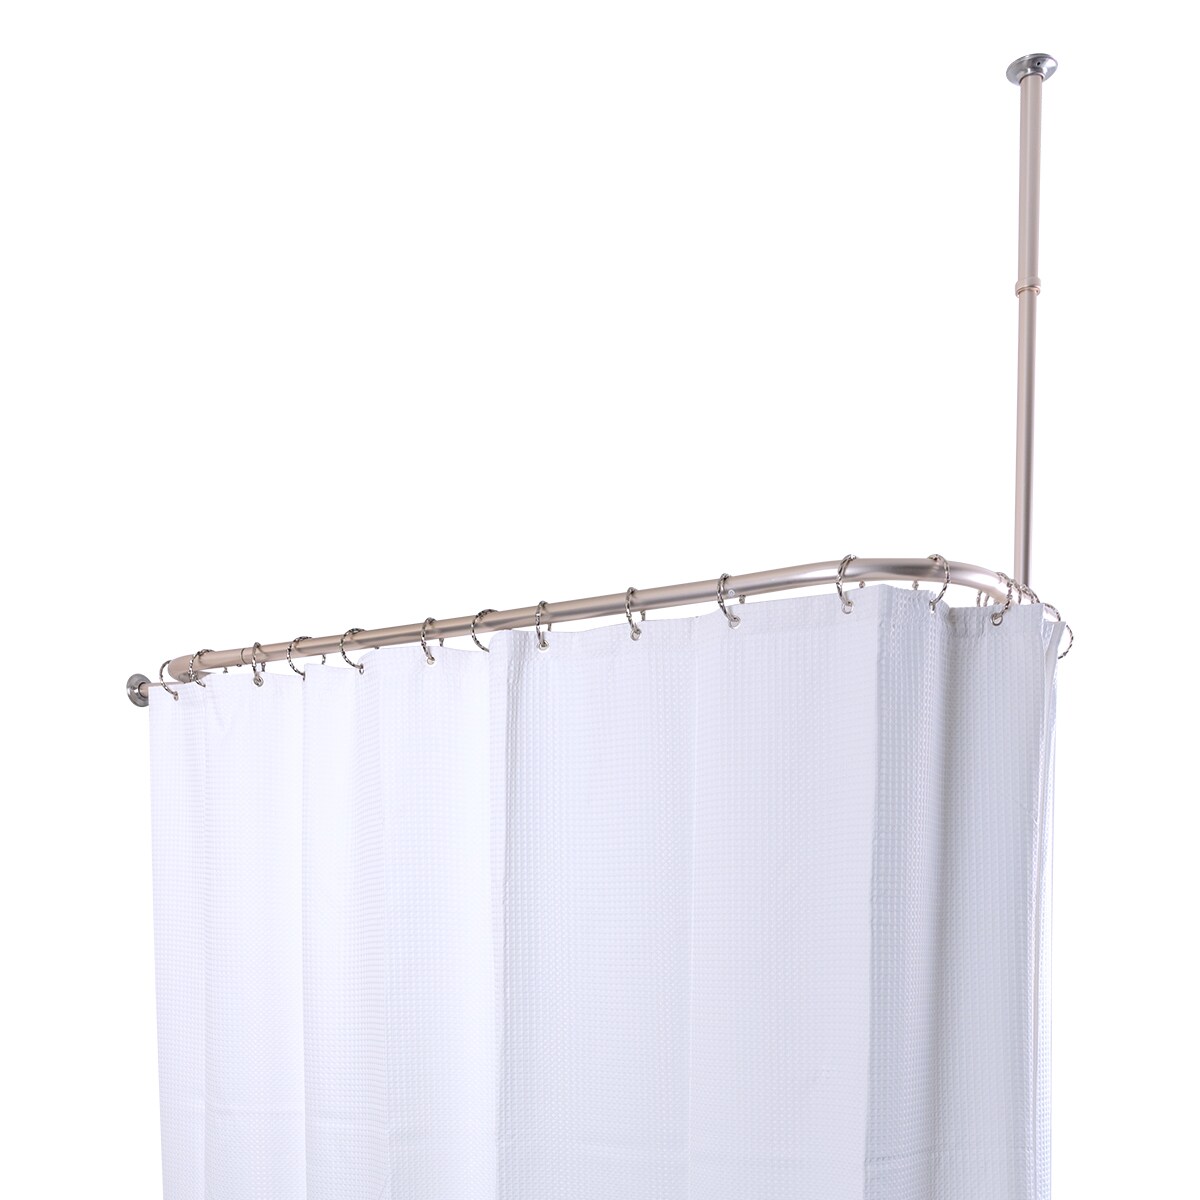 Utopia Alley 24 In To 58 3 Brushed Nickel Fixed Clawfoot Tub Shower Curtain Rod The Rods Department At Lowes Com